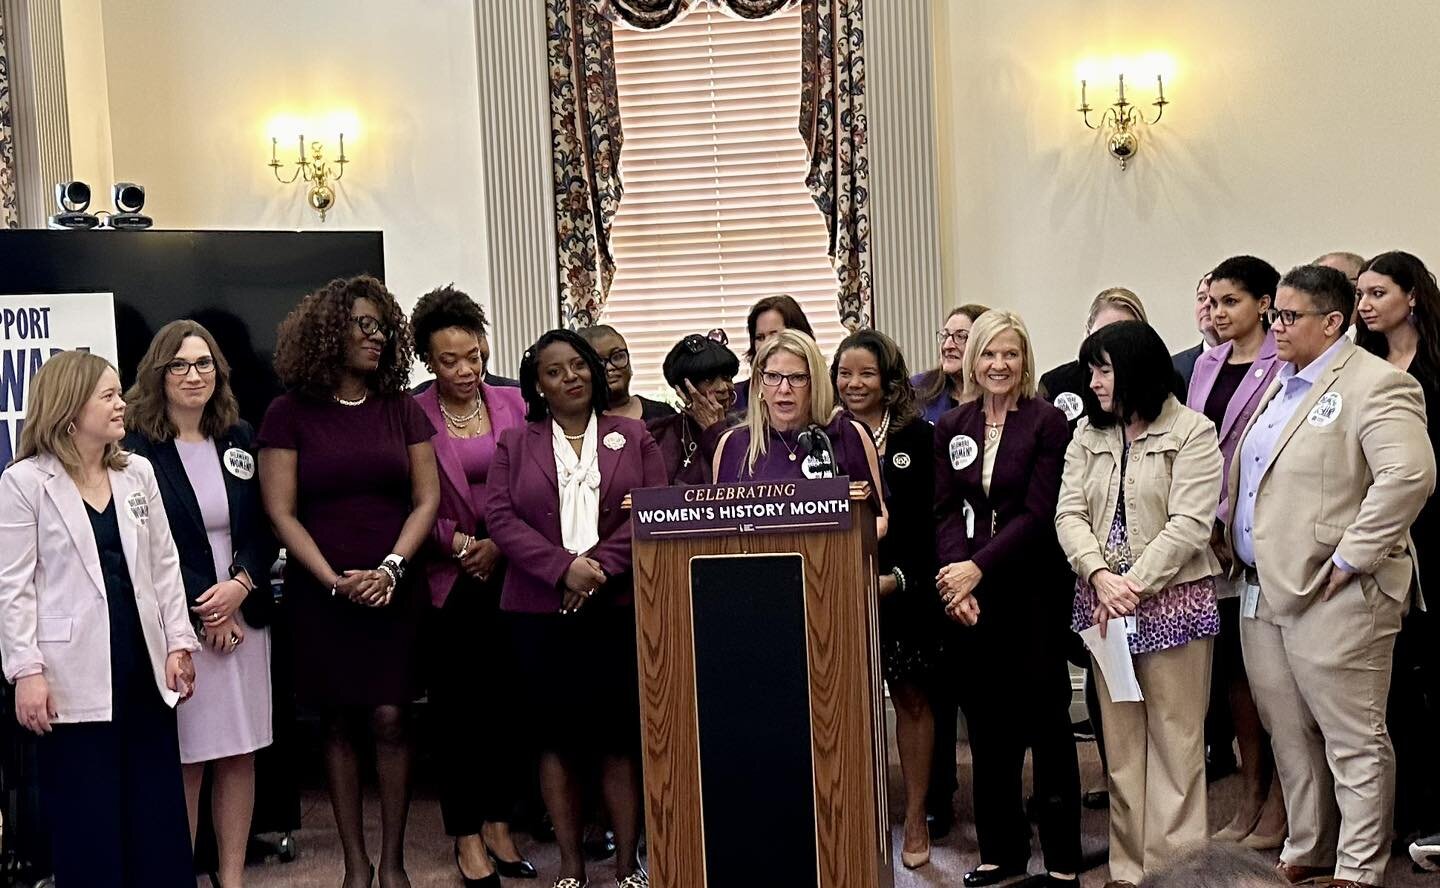 Today, and everyday, I stand alongside barrier breaking women who do so much to address the issues that face our state with strength and resolve. It was an honor to join Delaware Speaker of the House @repvalerielonghurst and Pennsylvania&rsquo;s Spea